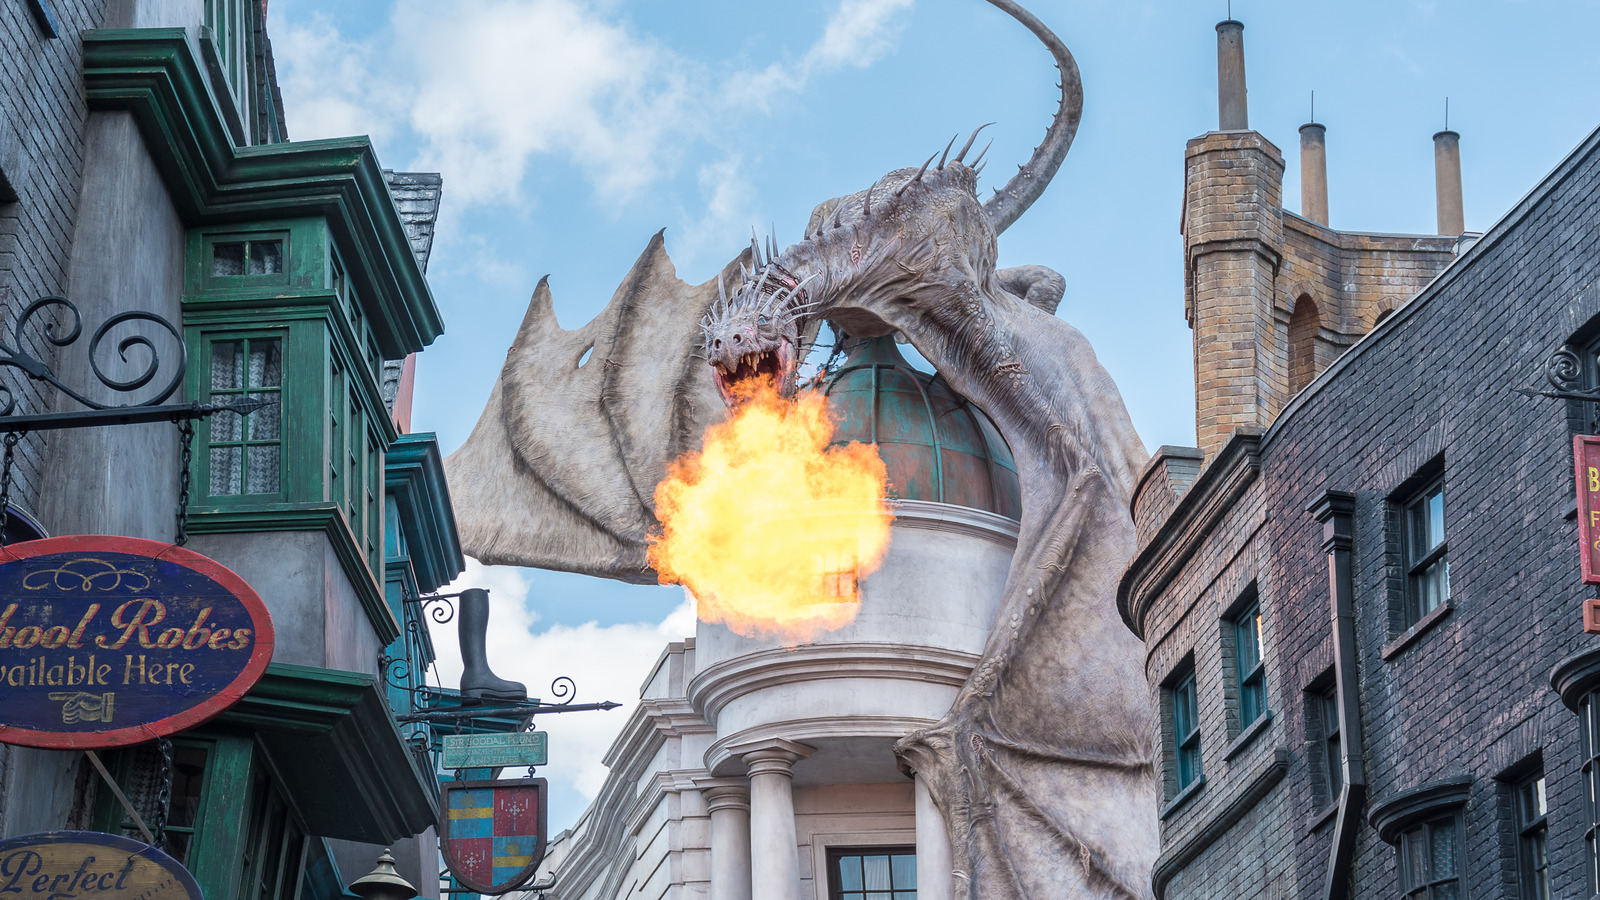 Ranked: The Attractions of Islands of Adventure 